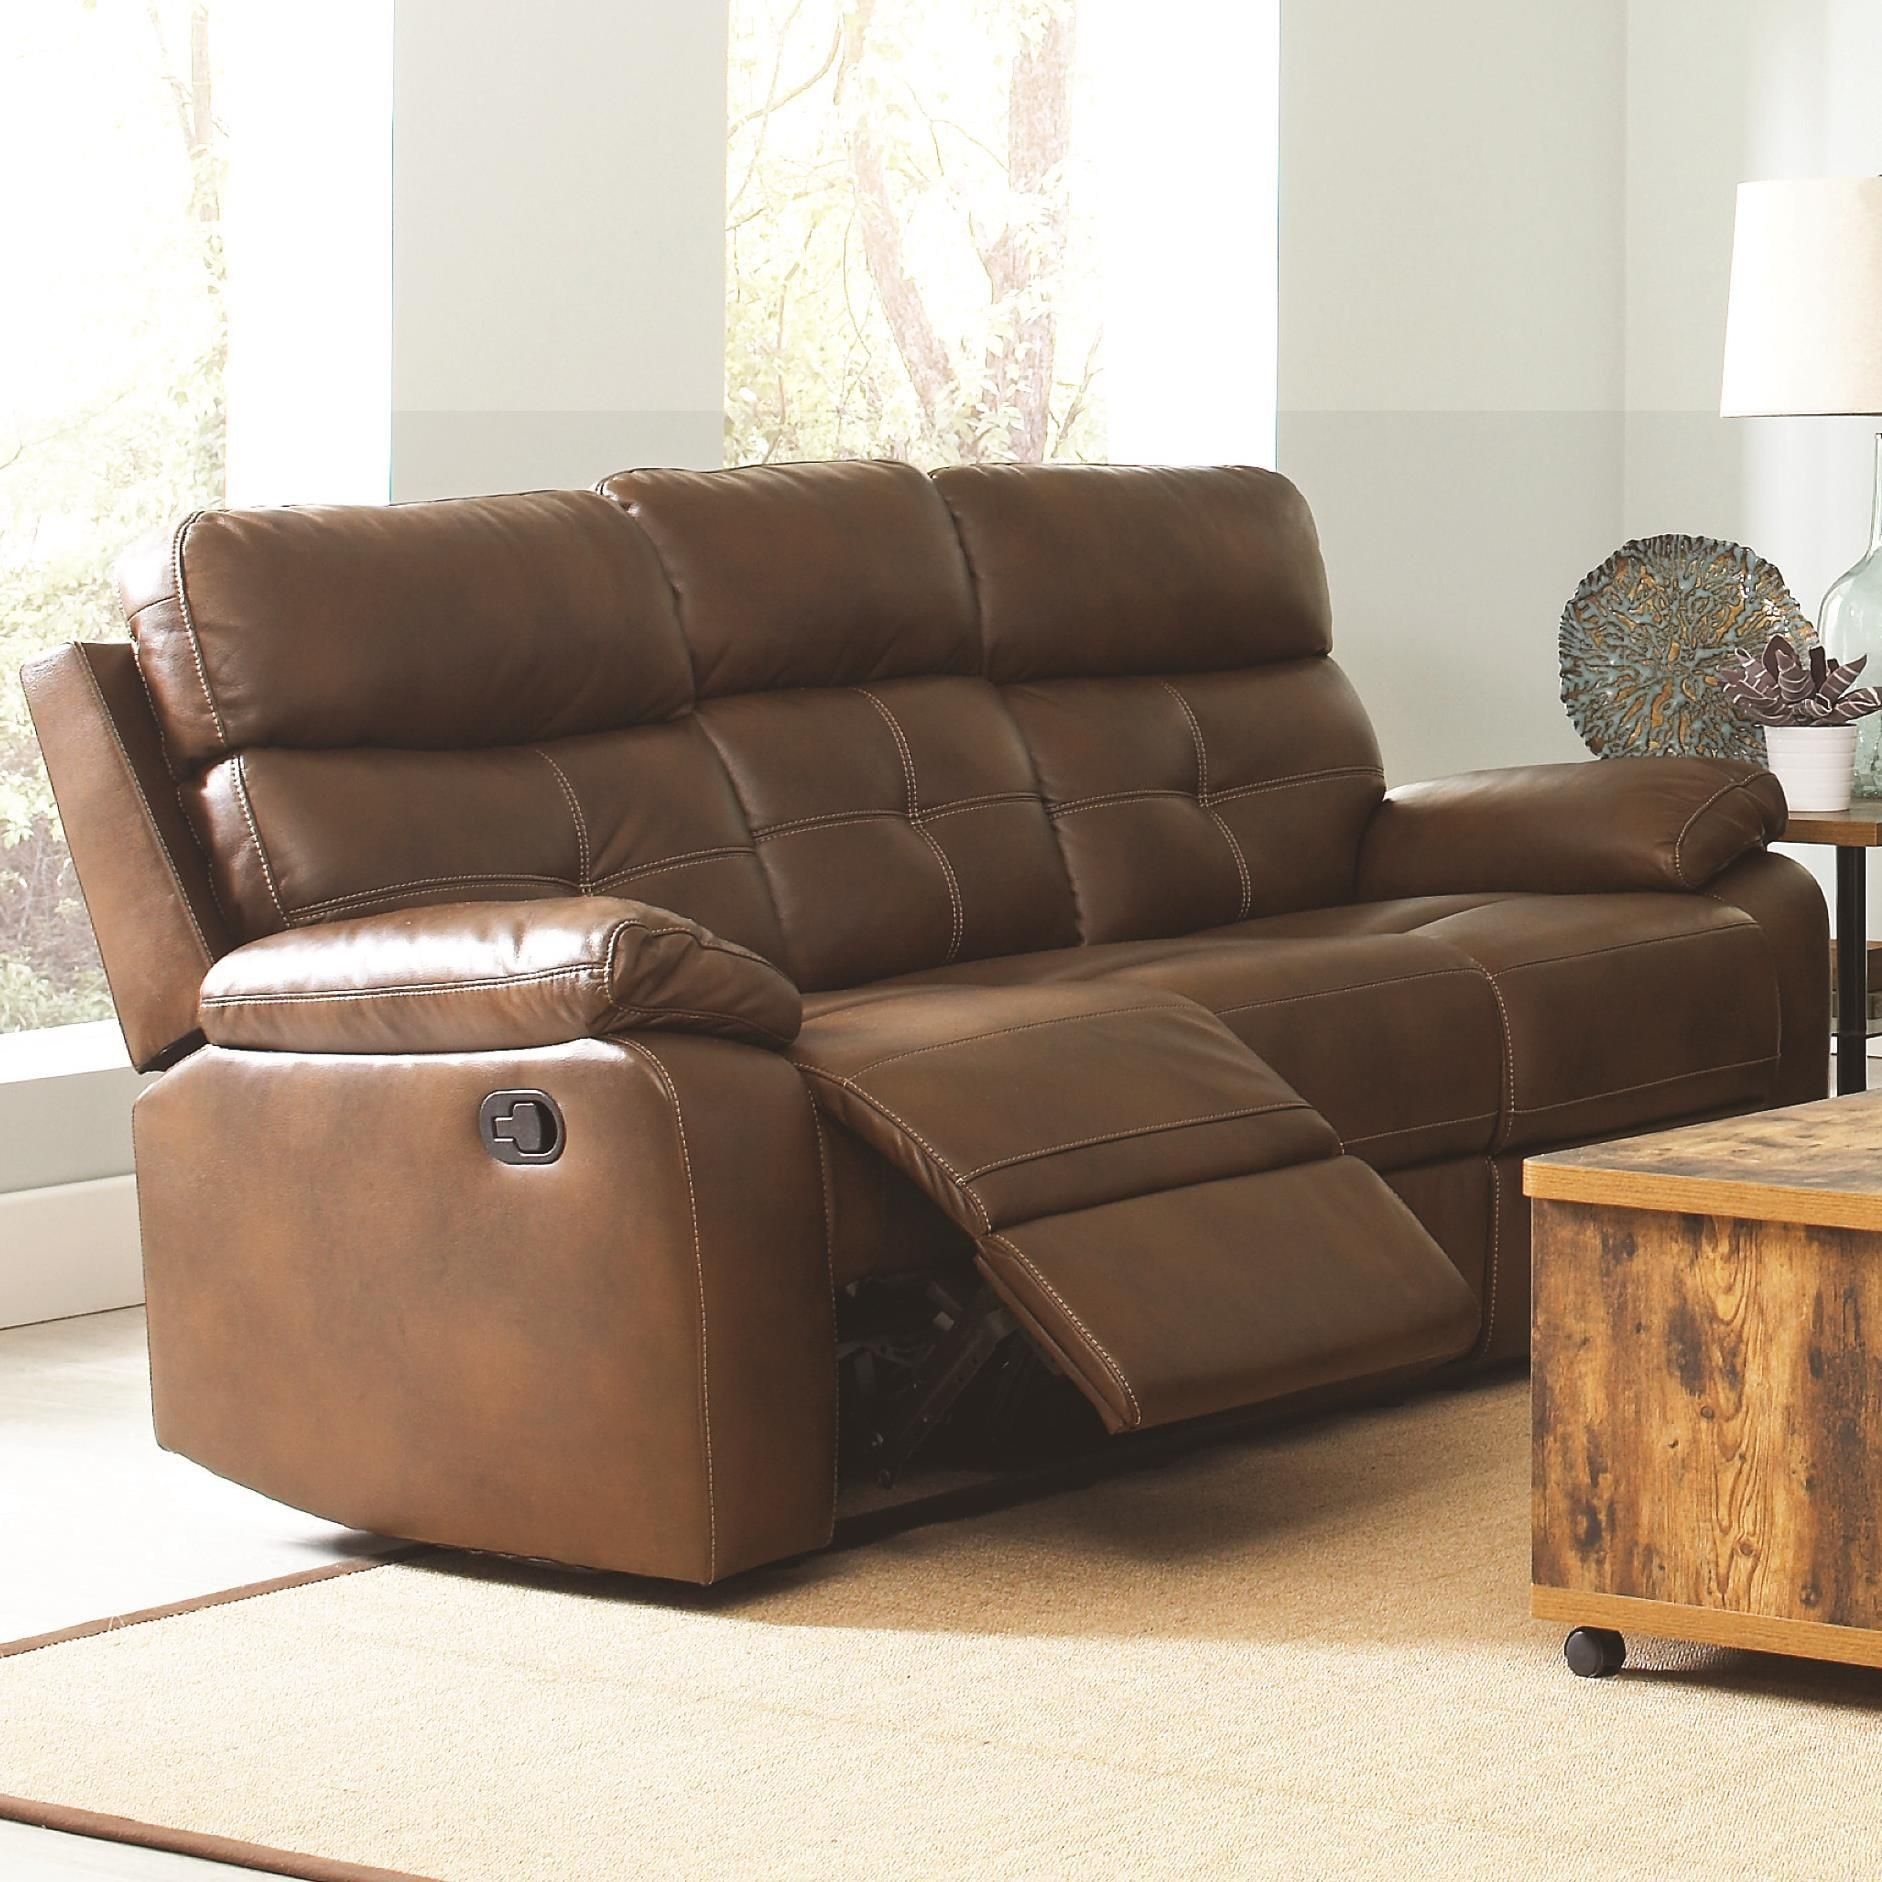 Damiano Faux Leather Reclining Sofa From Coaster (601691) | Coleman Inside Faux Leather Sofas (Gallery 21 of 21)